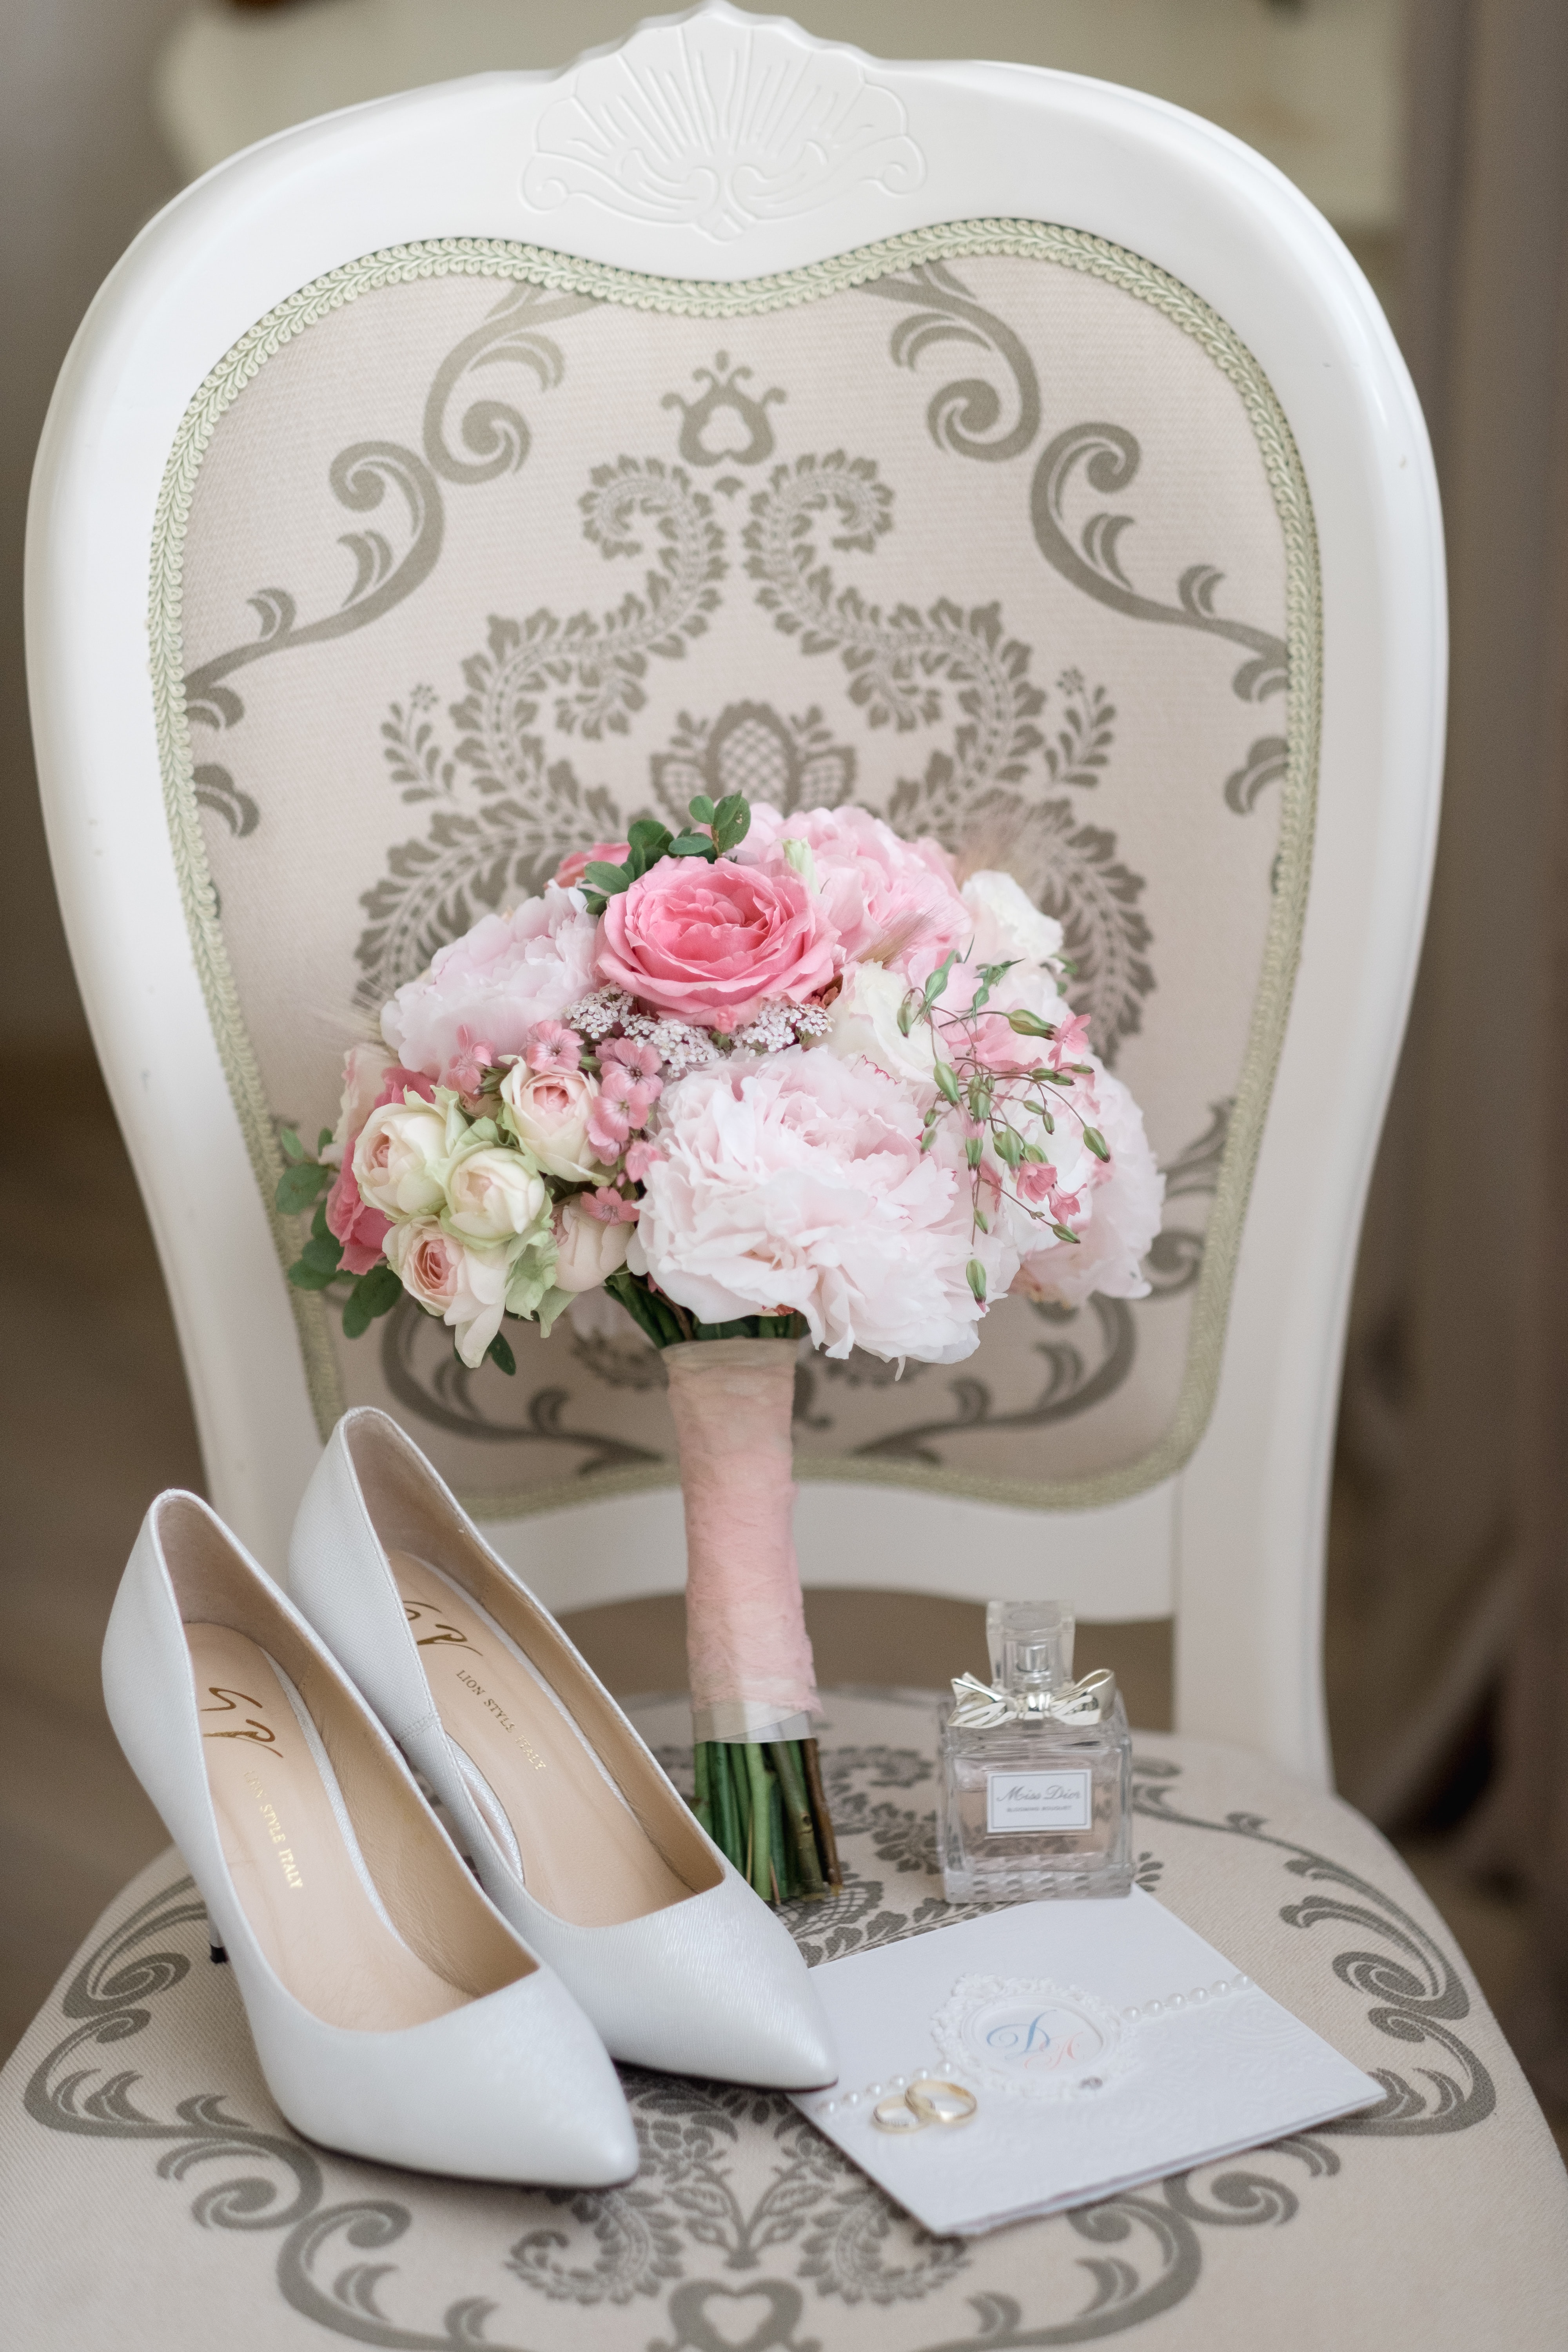 White wedding shoes placed on a chair along with flowers